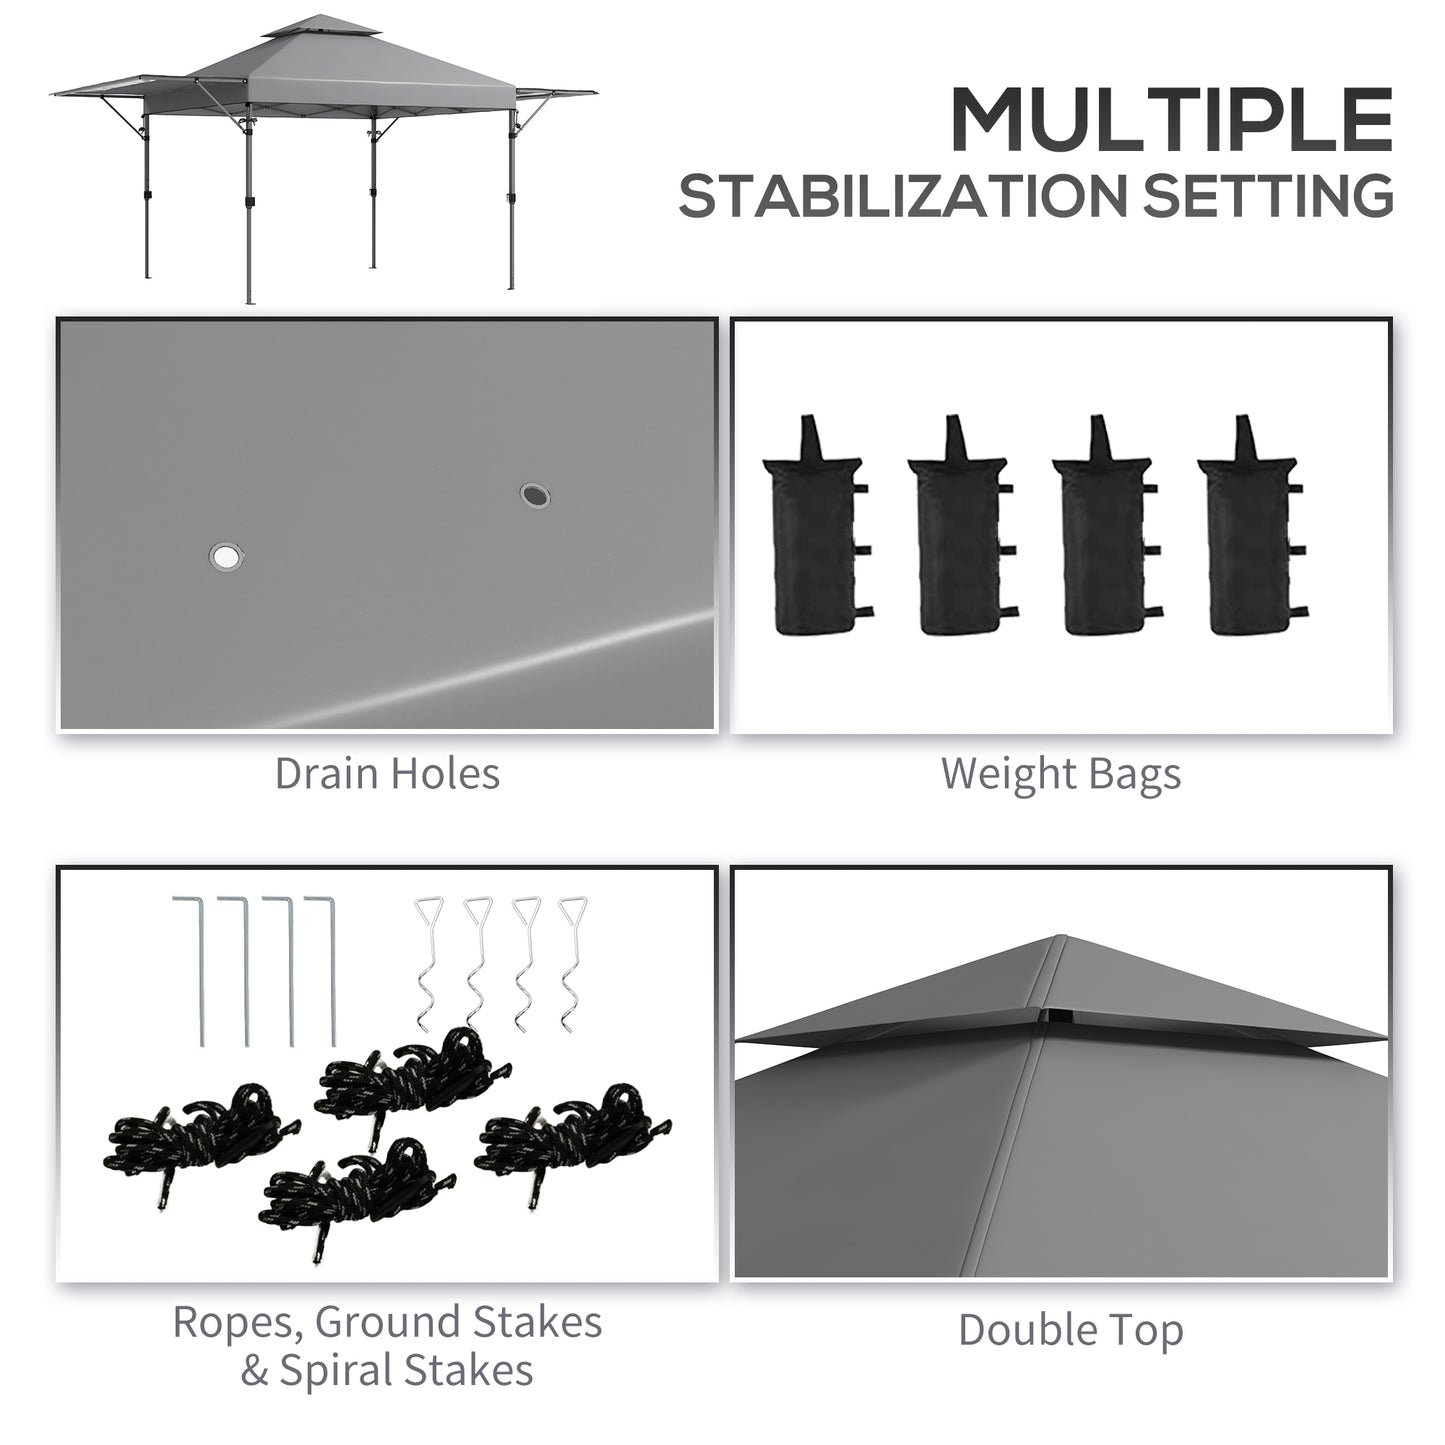 Outsunny 5 x 3(m) Pop Up Gazebo with Extend Dual Awnings, 1 Person Easy up Marquee Party Tent w-1-Button Push, Double Roof, Sandbags,